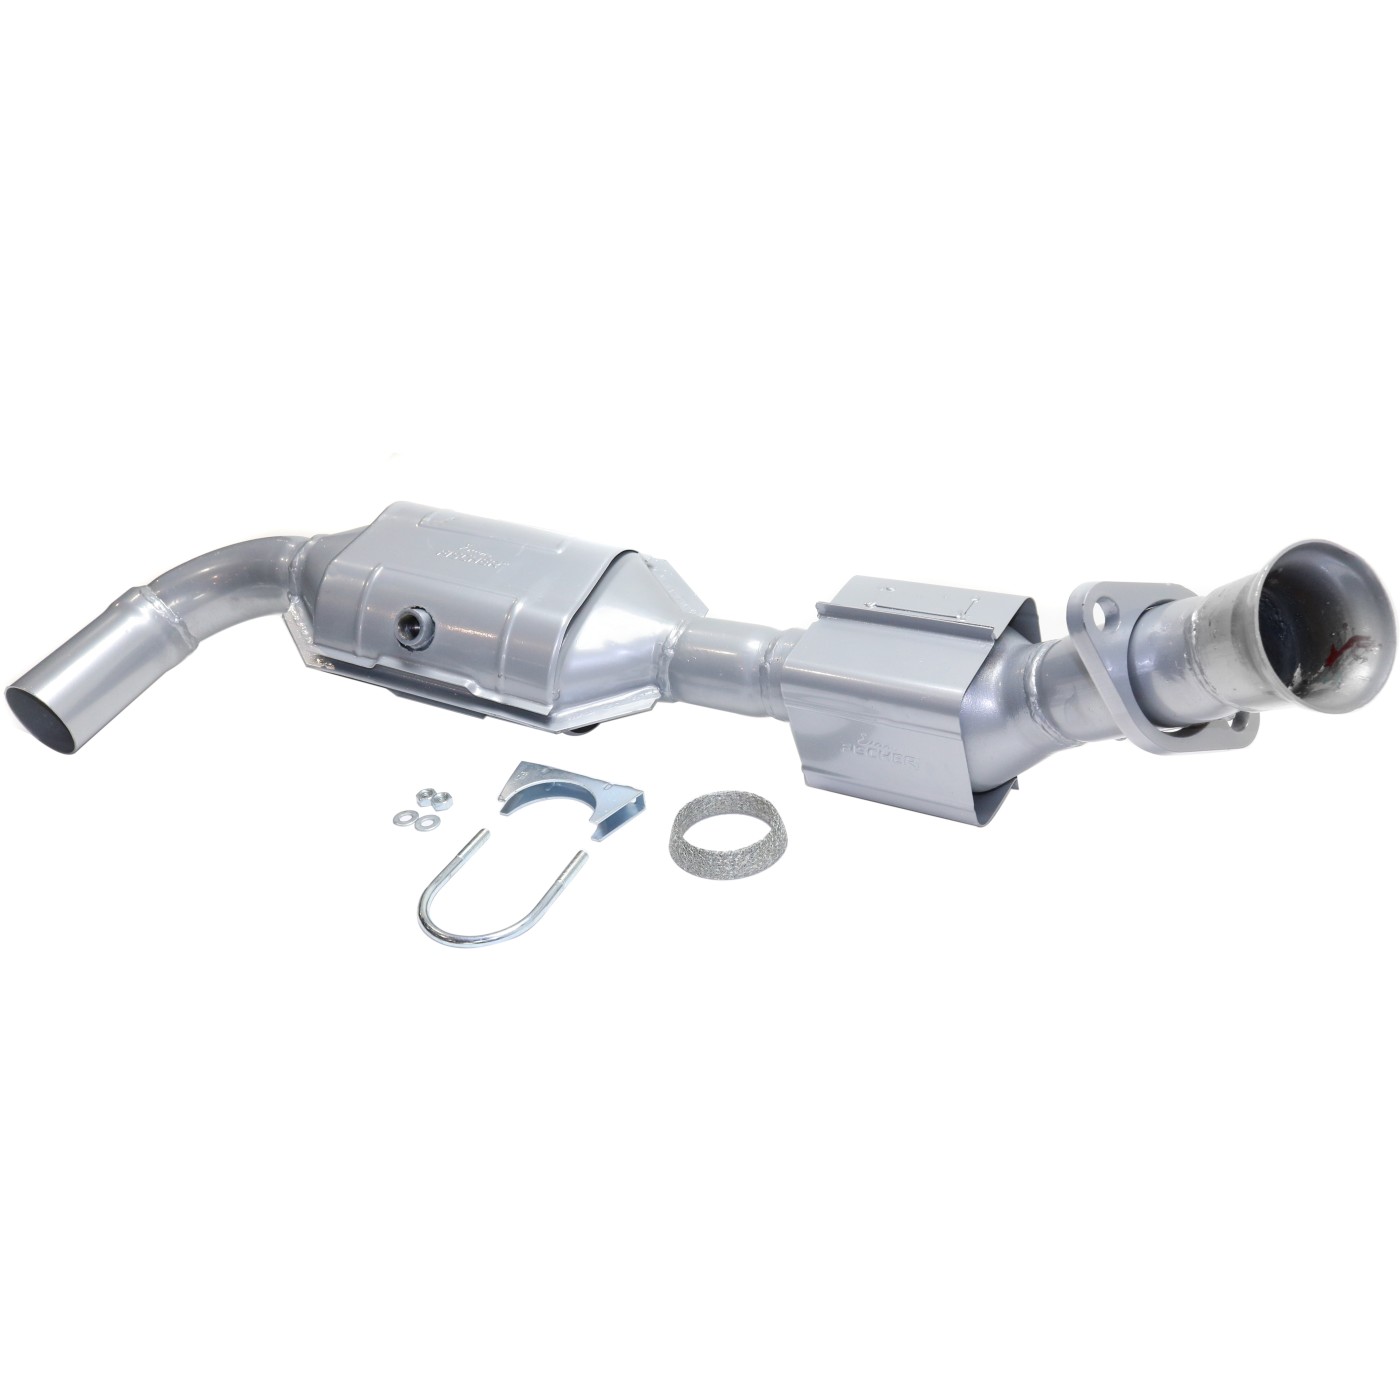 New Catalytic Converter For 2004 Ford F-150 Heritage 2001-2003 F150 RWD